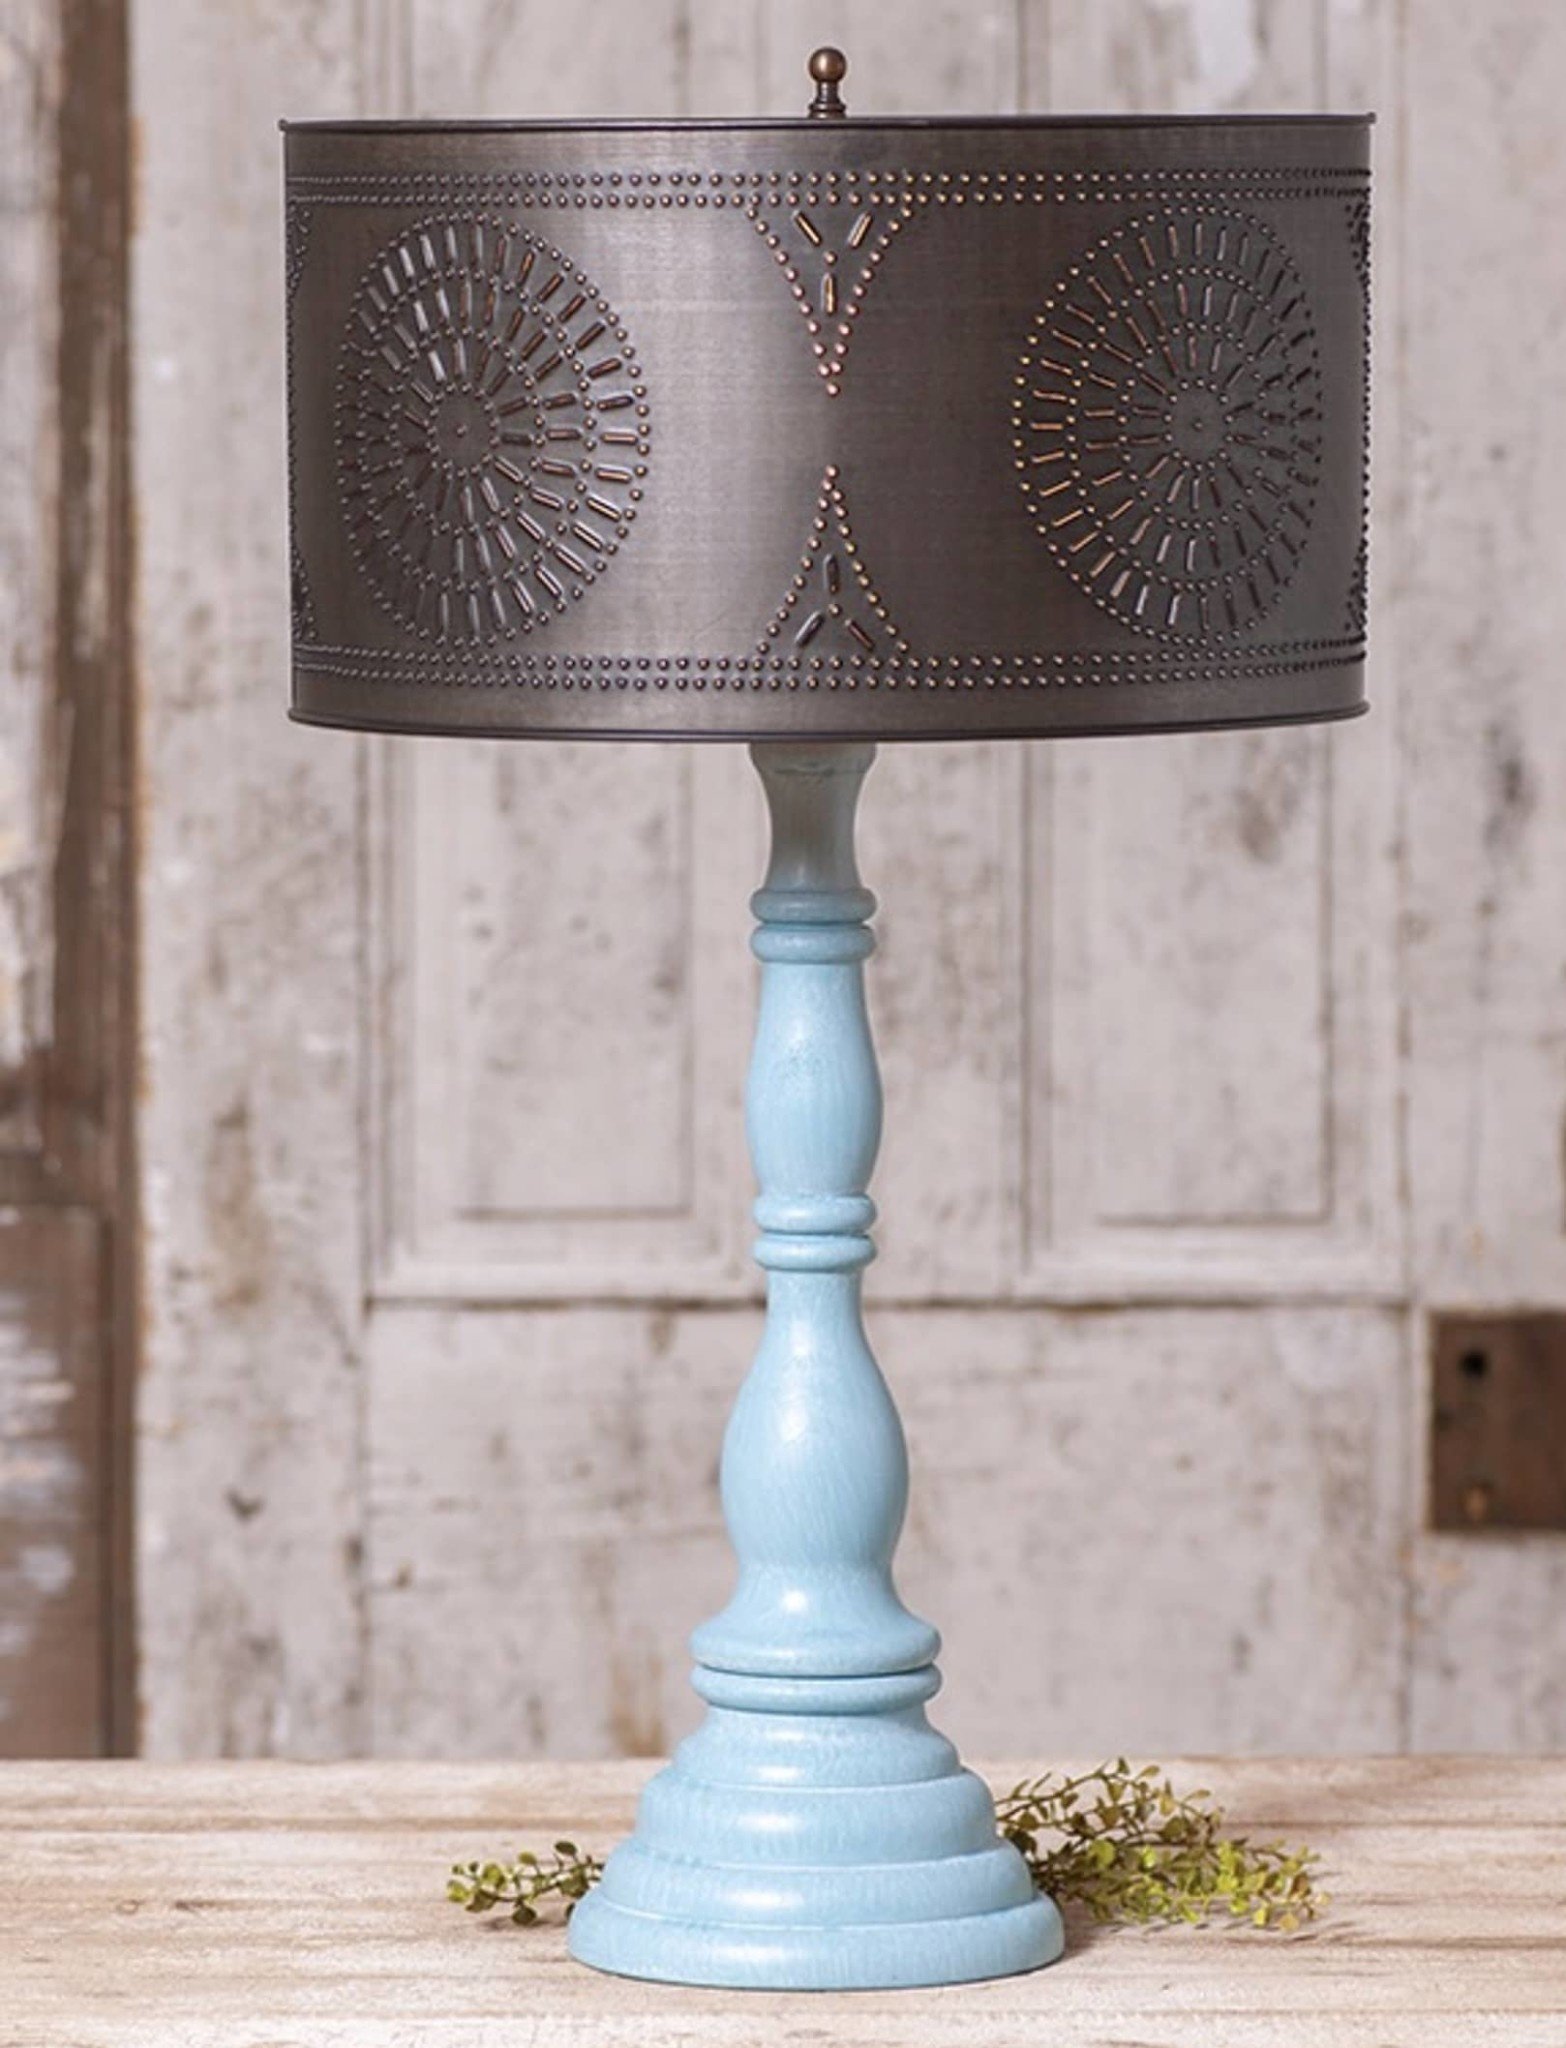 Irvin's Tinware Davenport Lamp With Shade Brand: Irvin's Tinware